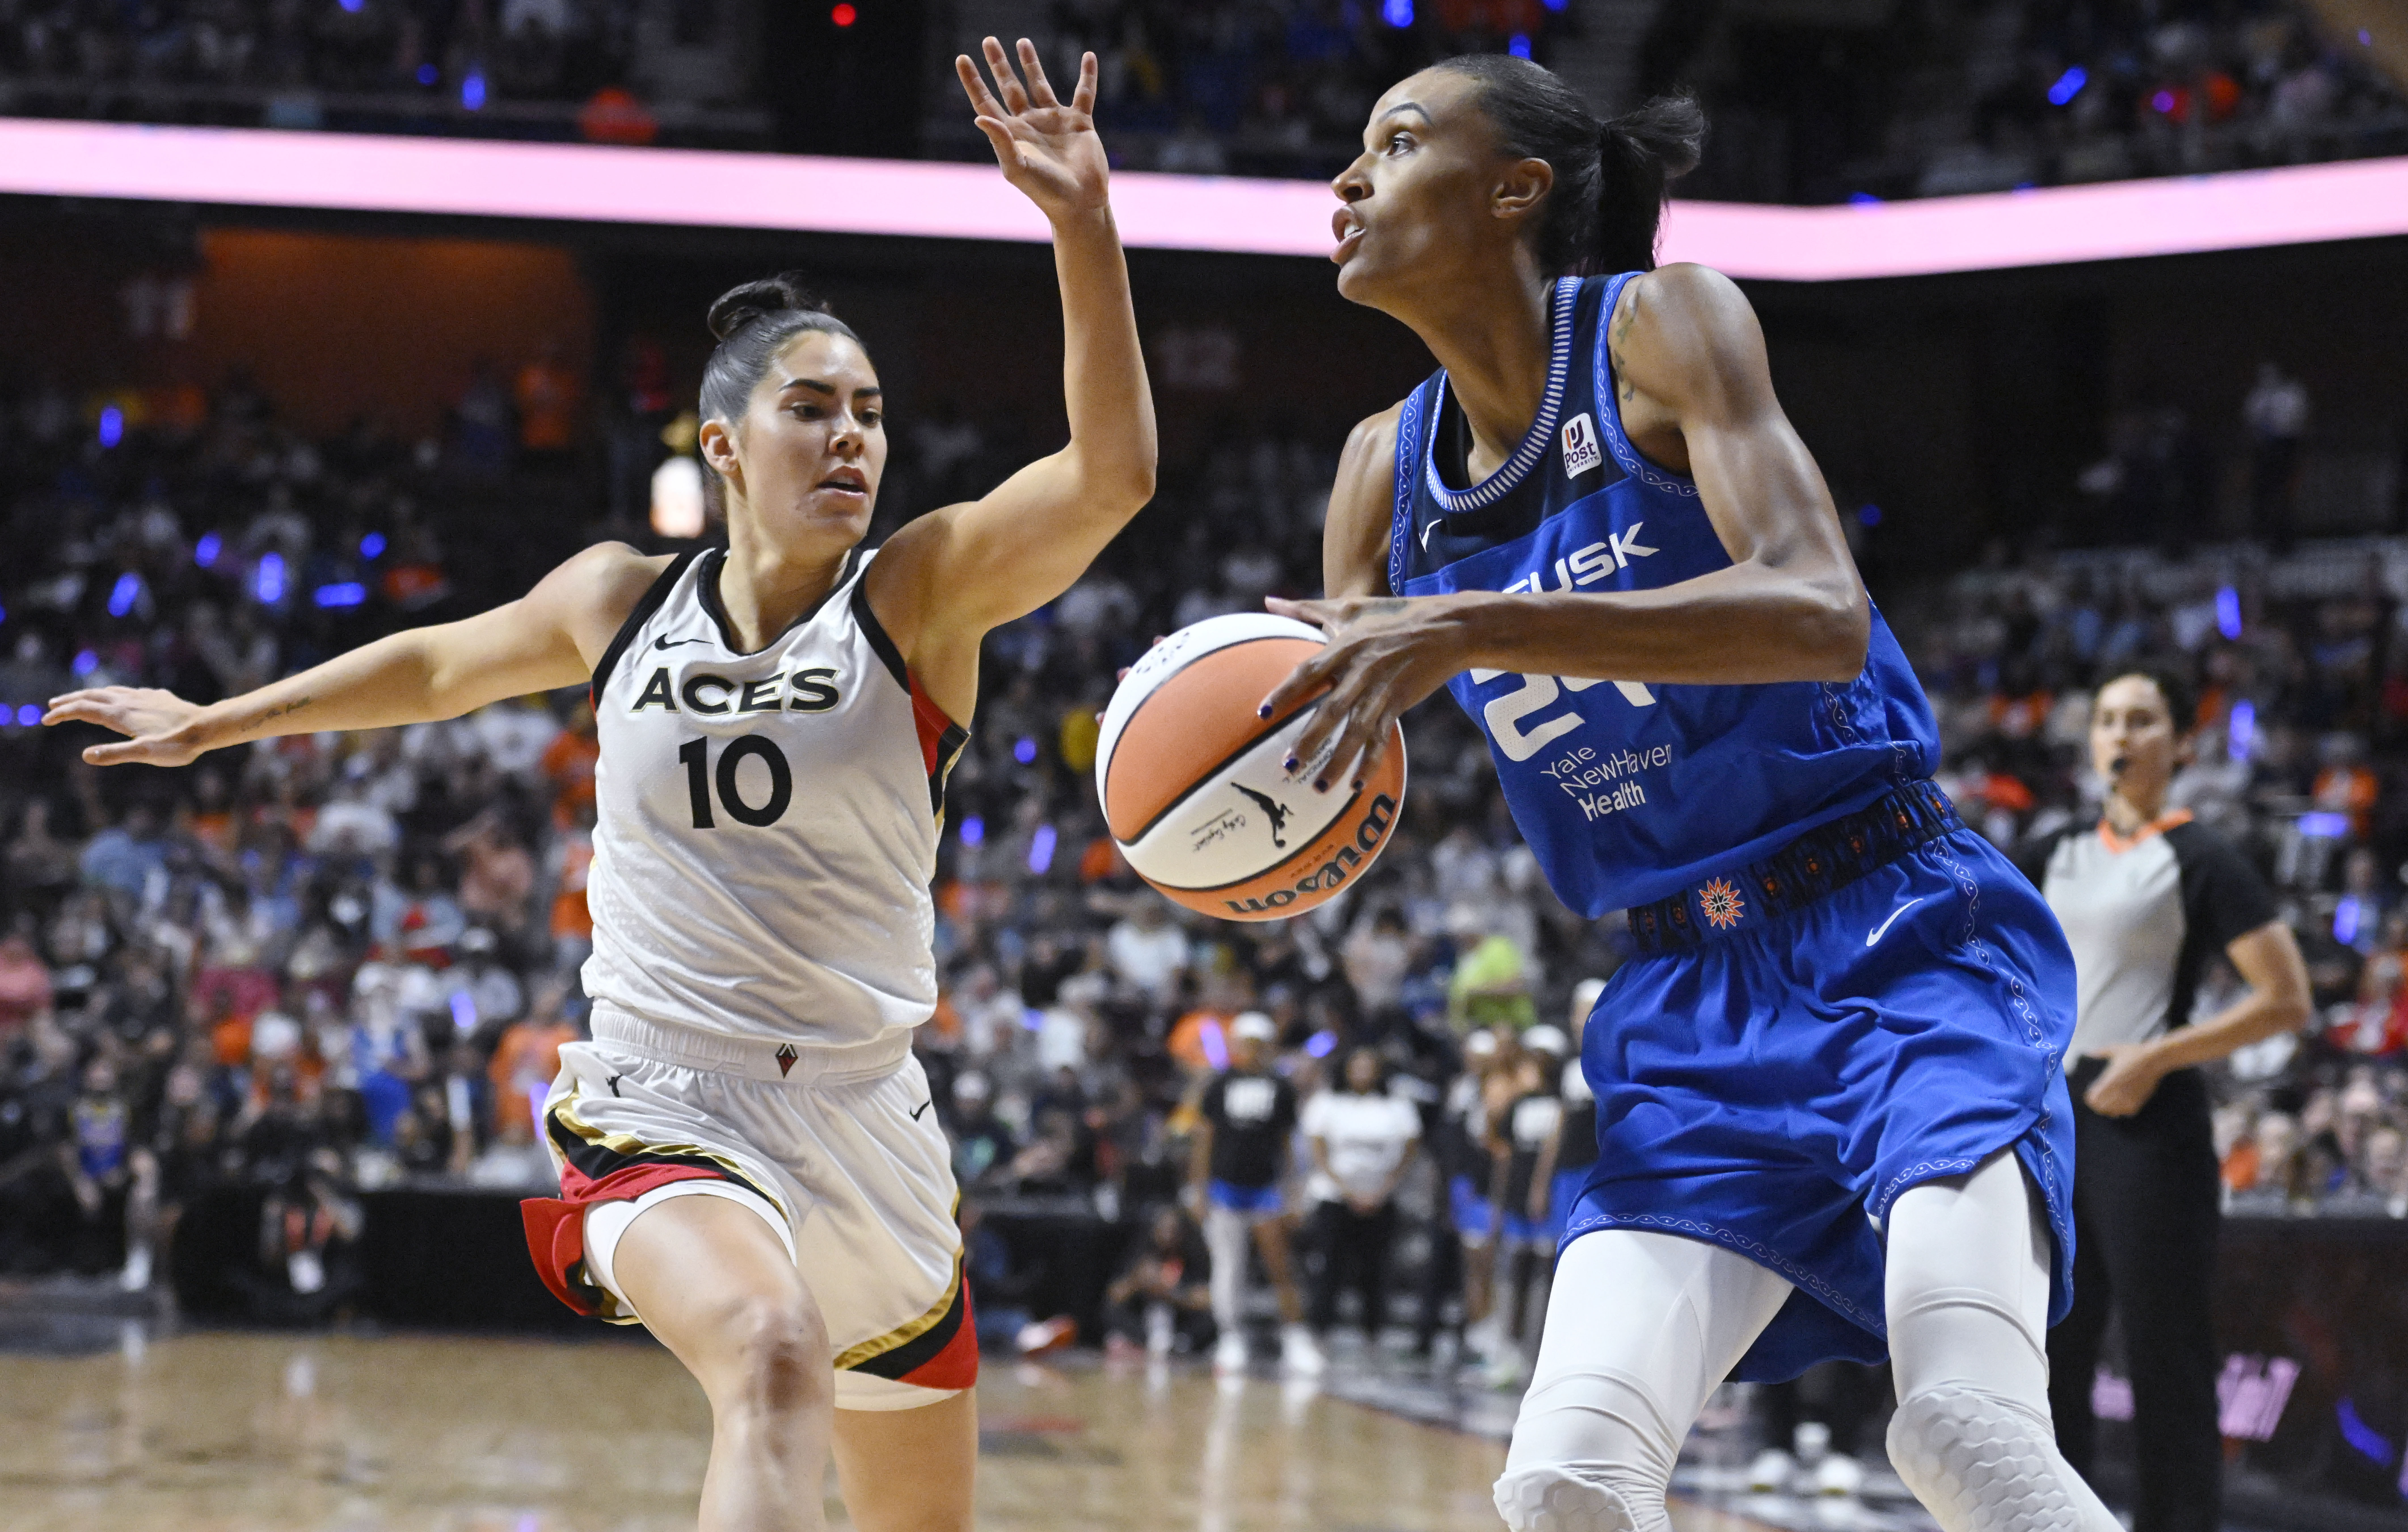 WNBA All-Star Game Live stream, start time, TV, how to watch for free